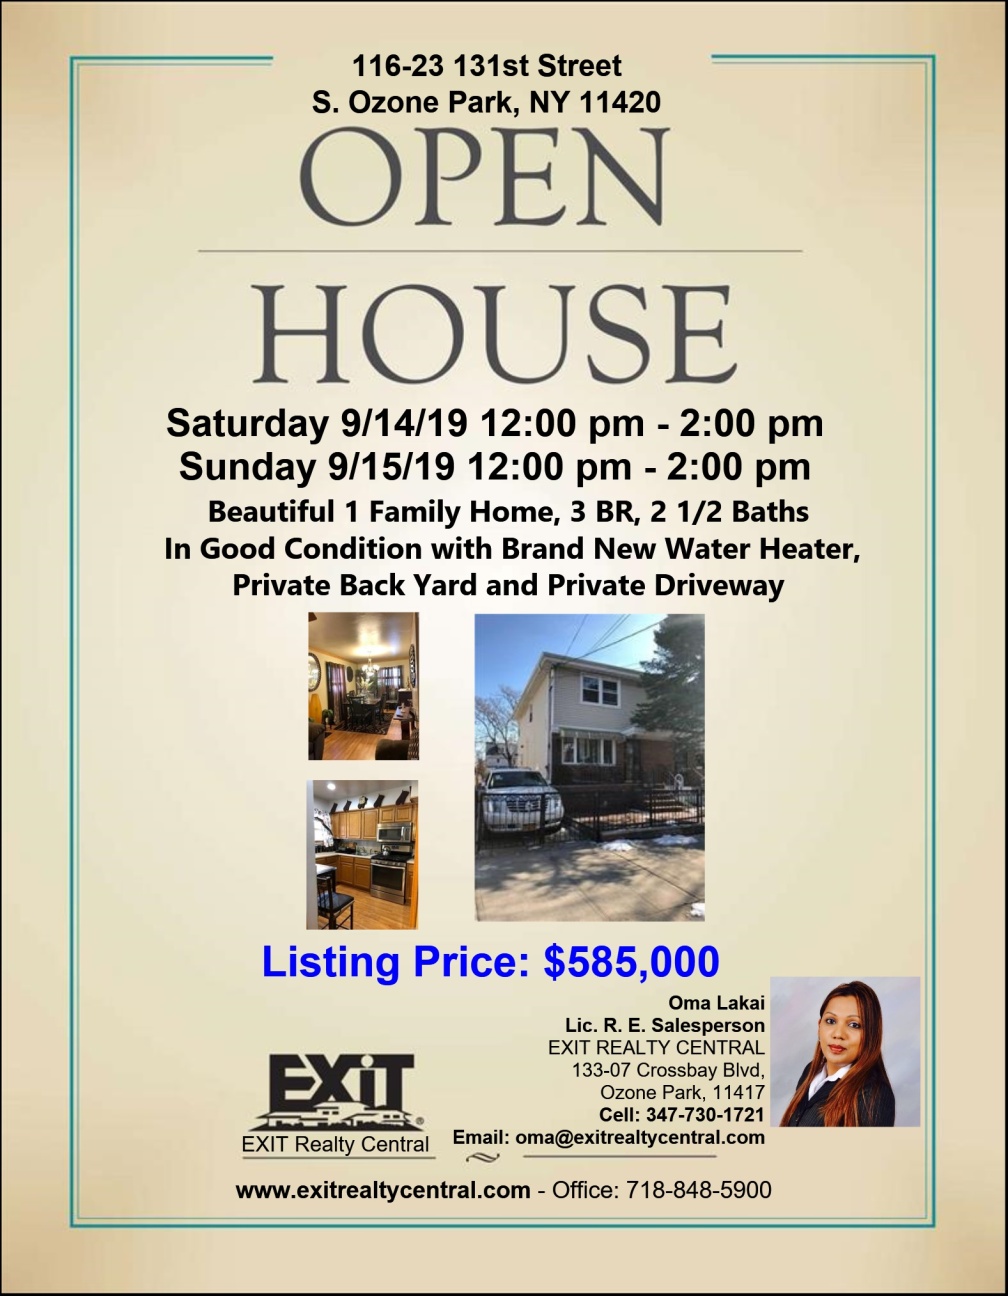 Open House in S. Ozone Park 9/14 & 9/15 12-2pm